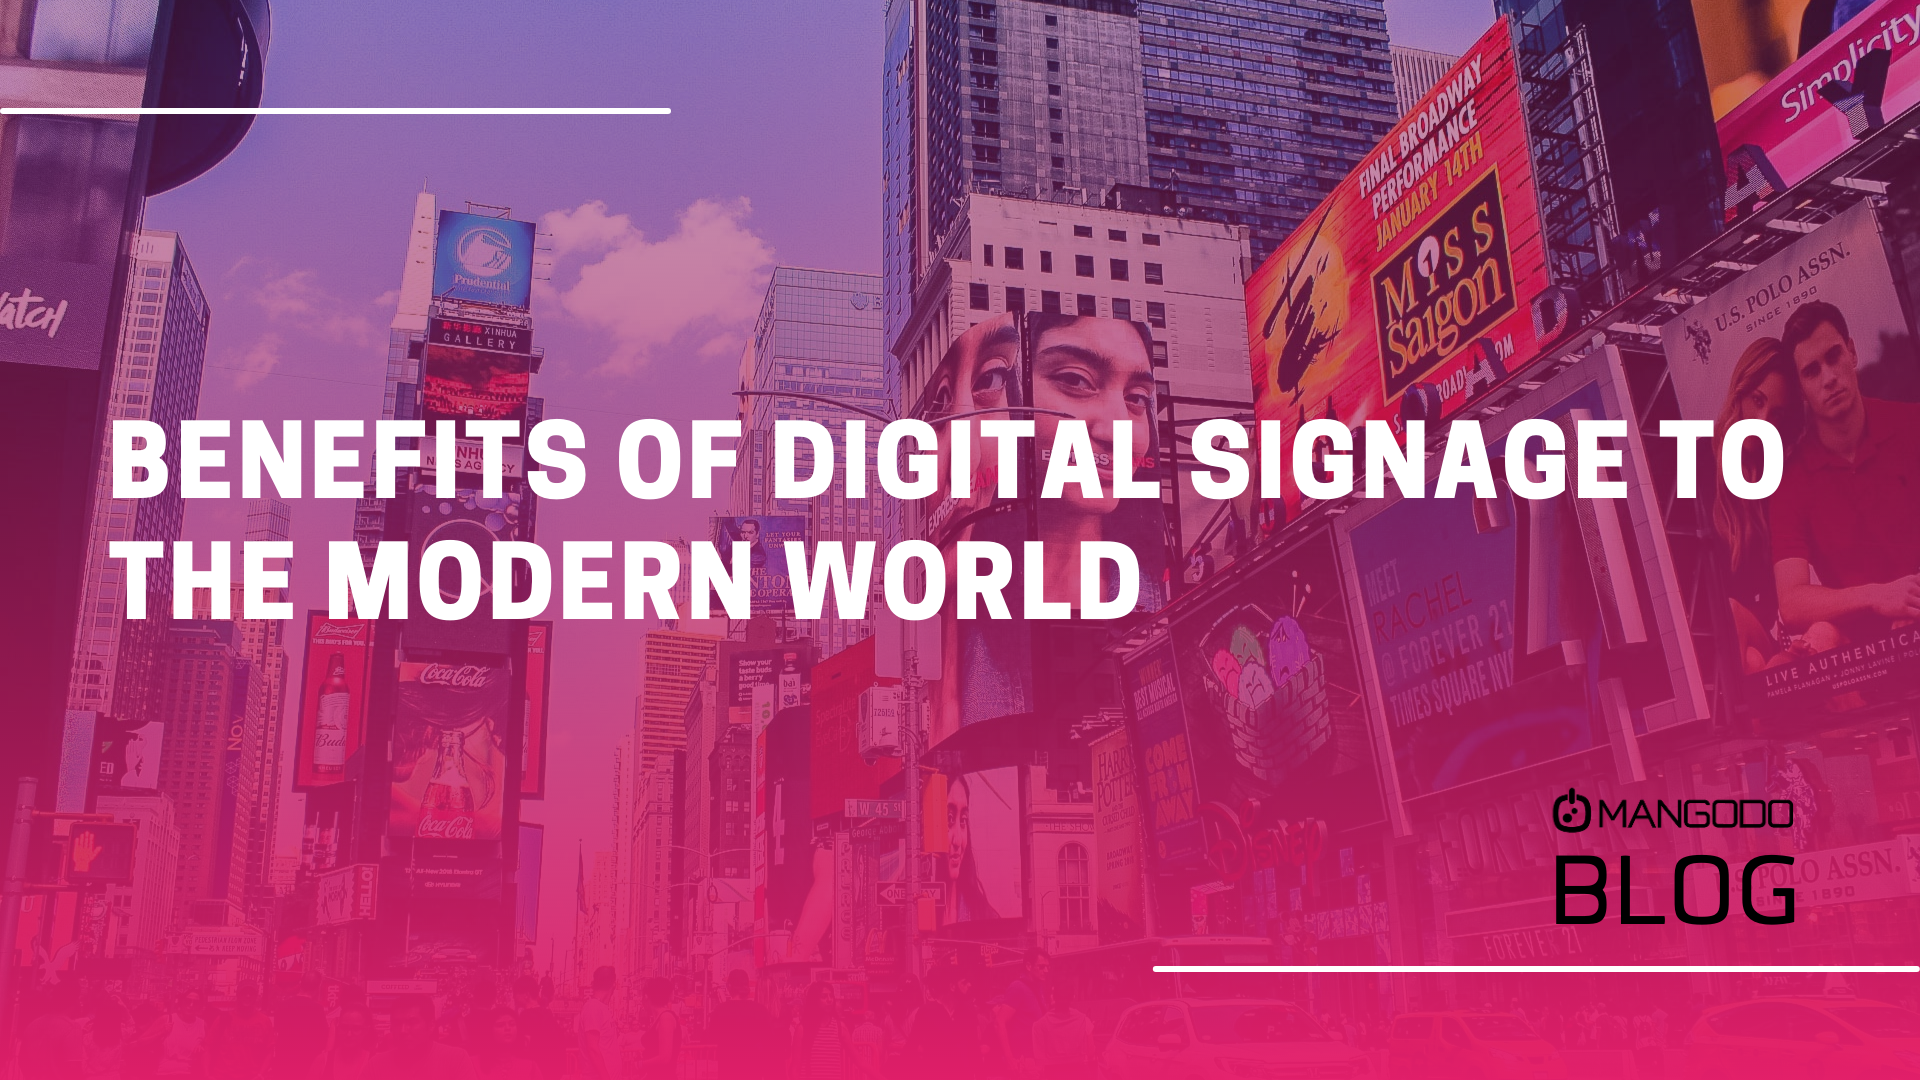 Benefits of Digital Signage to the Modern World